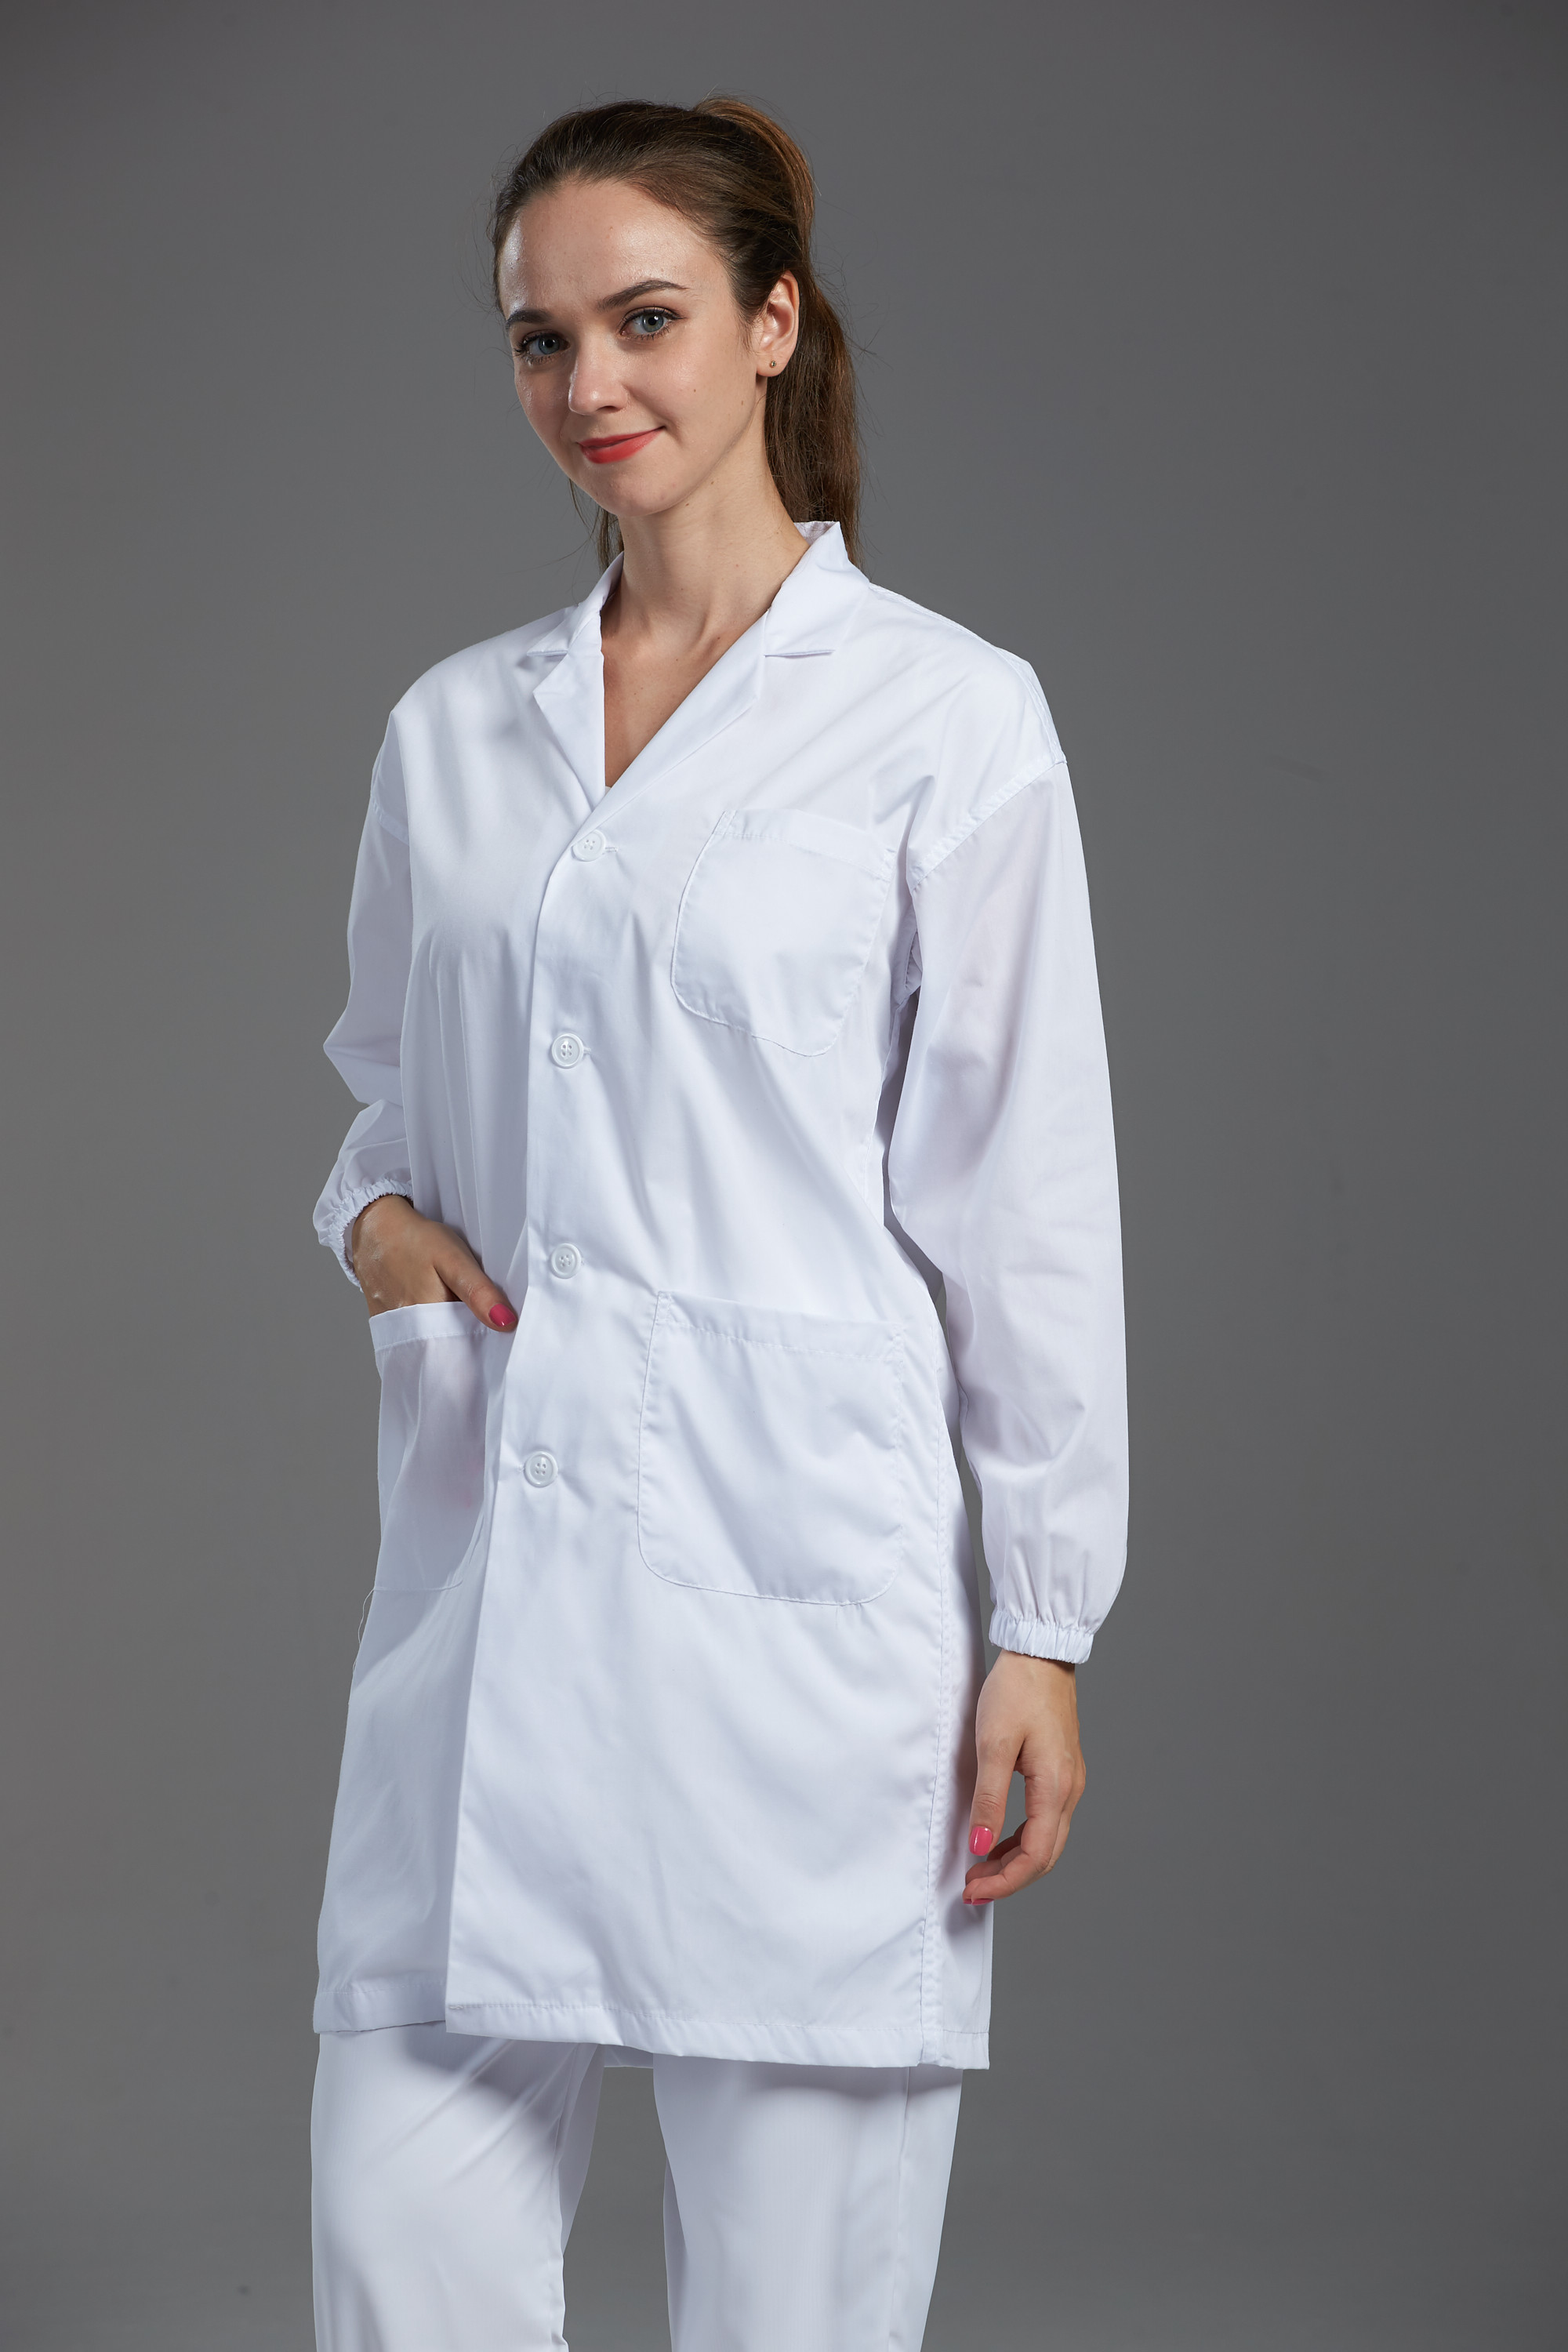 Best High Performance Esd Anti Static Garments , Food Factory Clothing Lightweight wholesale